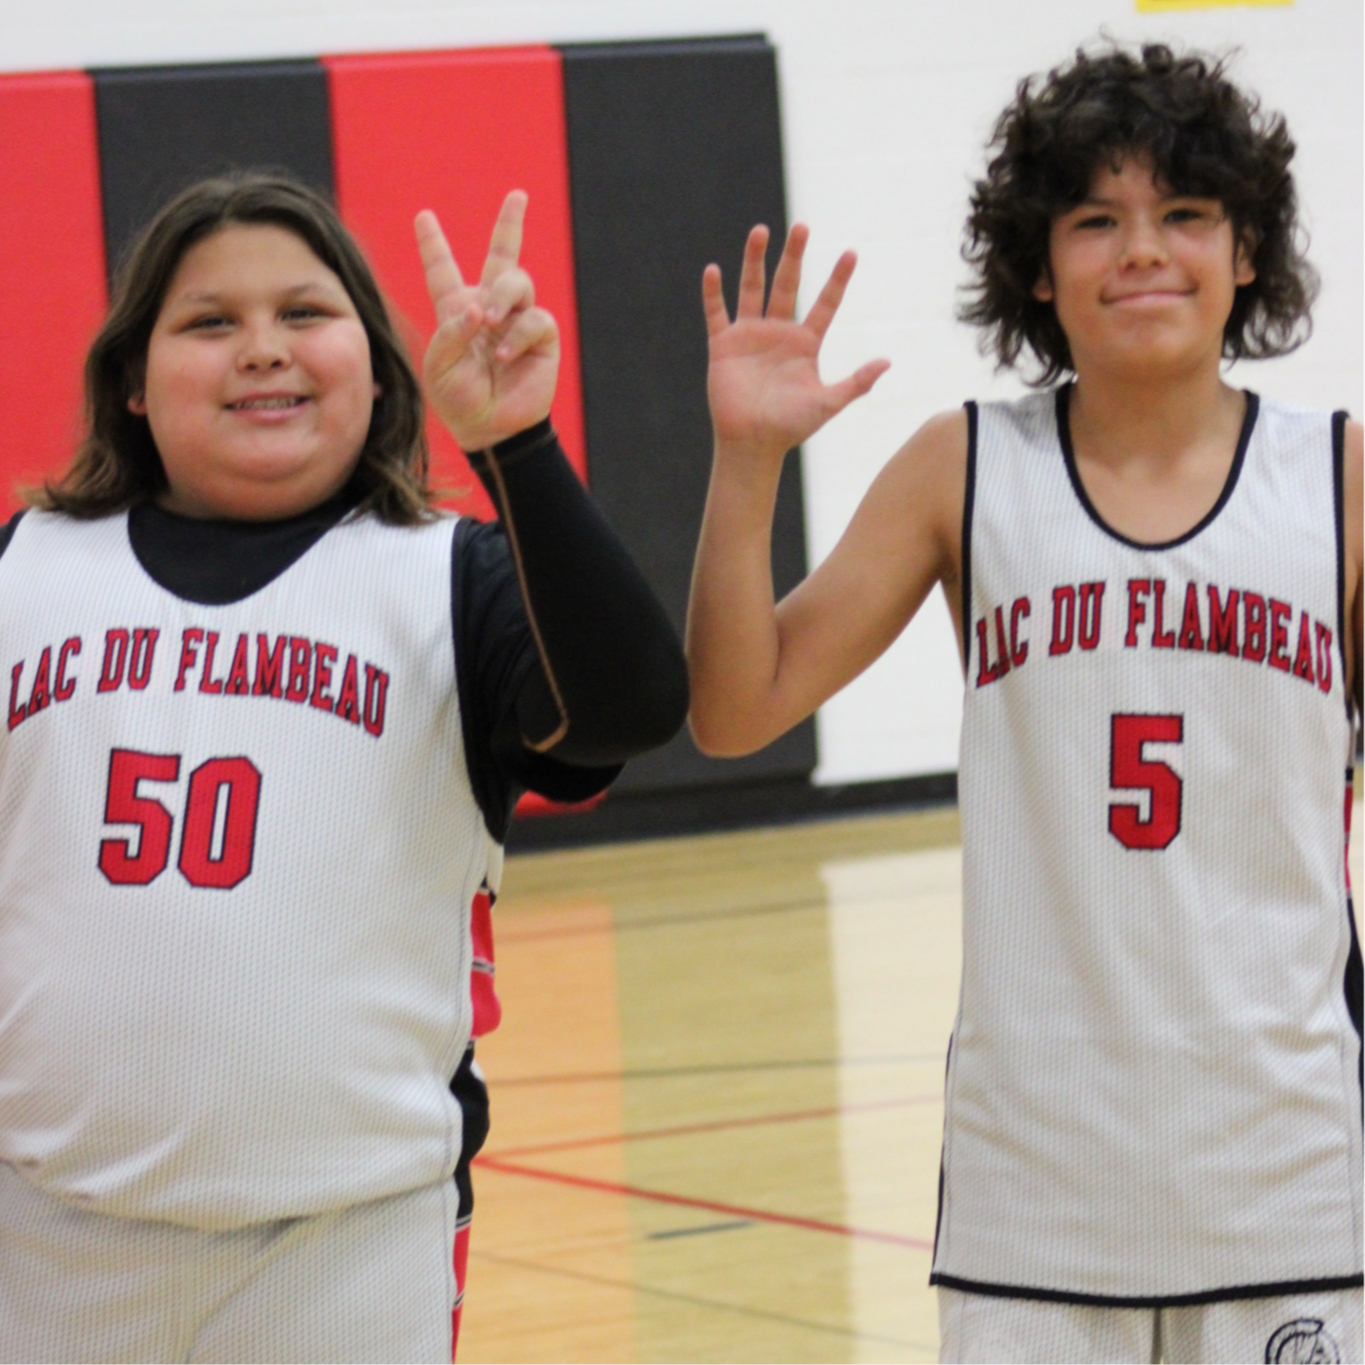 Two basketball players smile and wave at camera